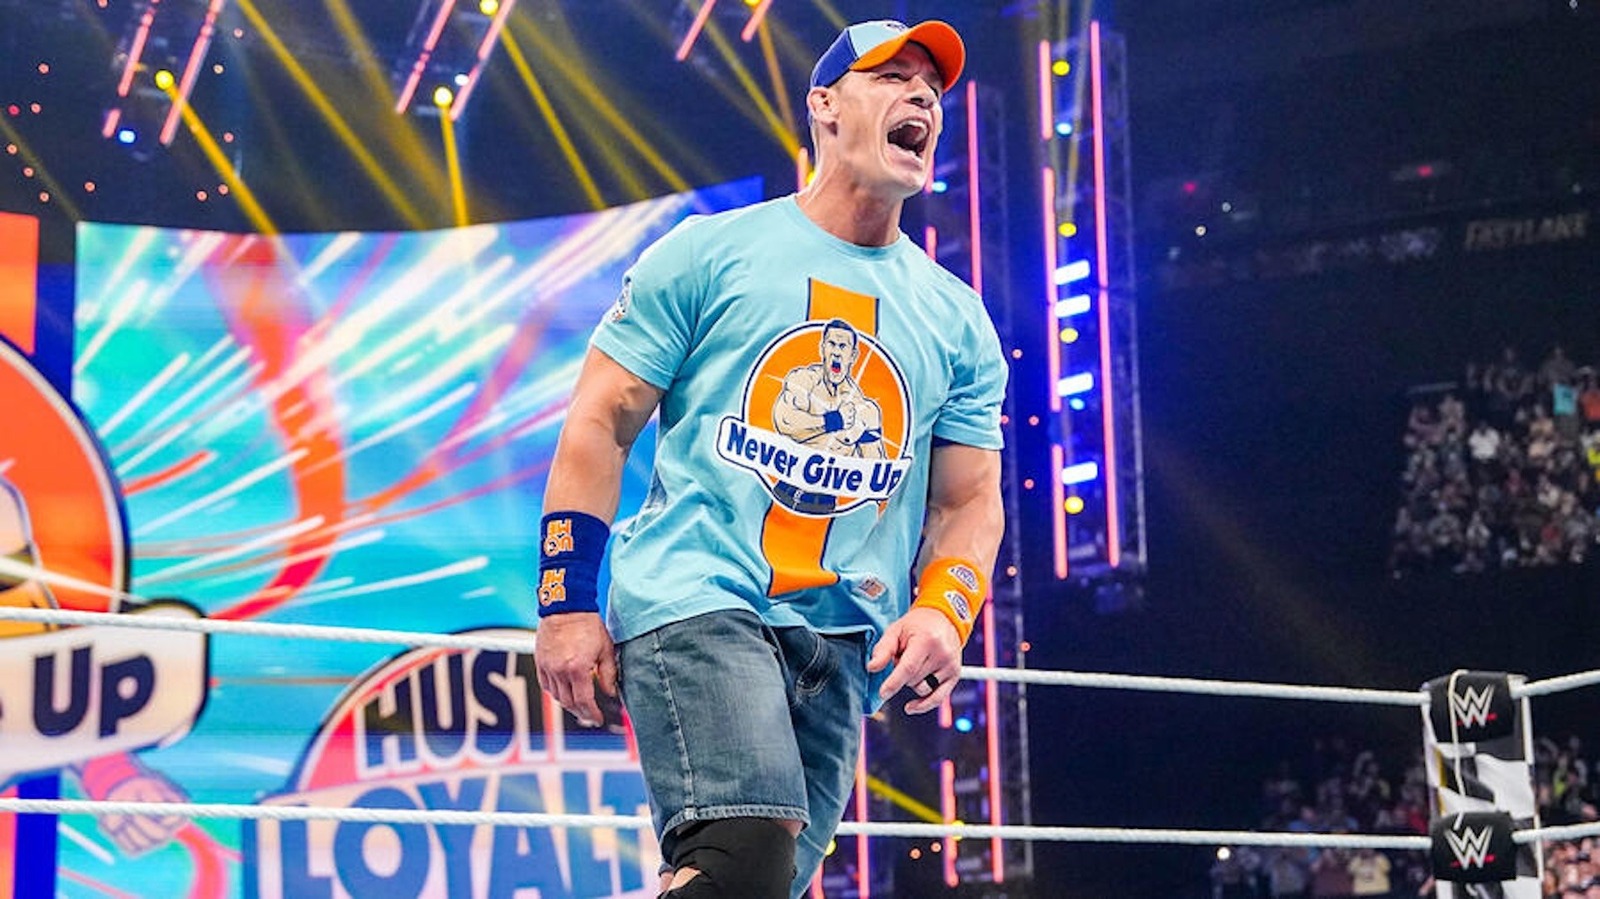 John Cena Makes Surprise Return To WWE Raw, Teams With Awesome Truth Vs. Judgment Day